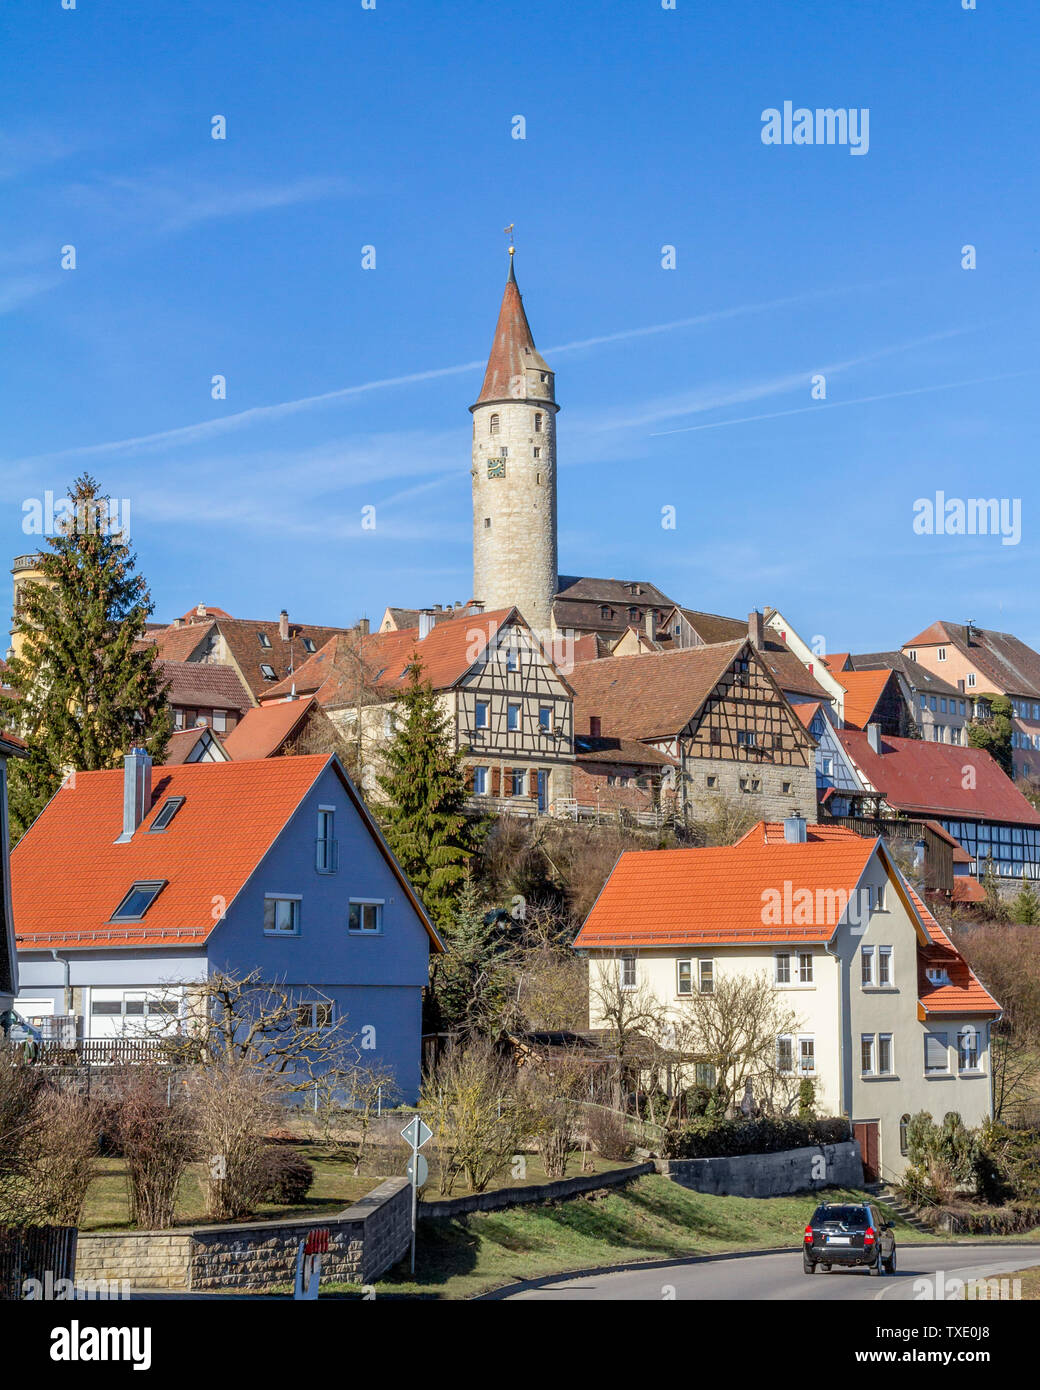 Impression of Kirchberg an der Jagst, a town in Southern Germany Stock Photo